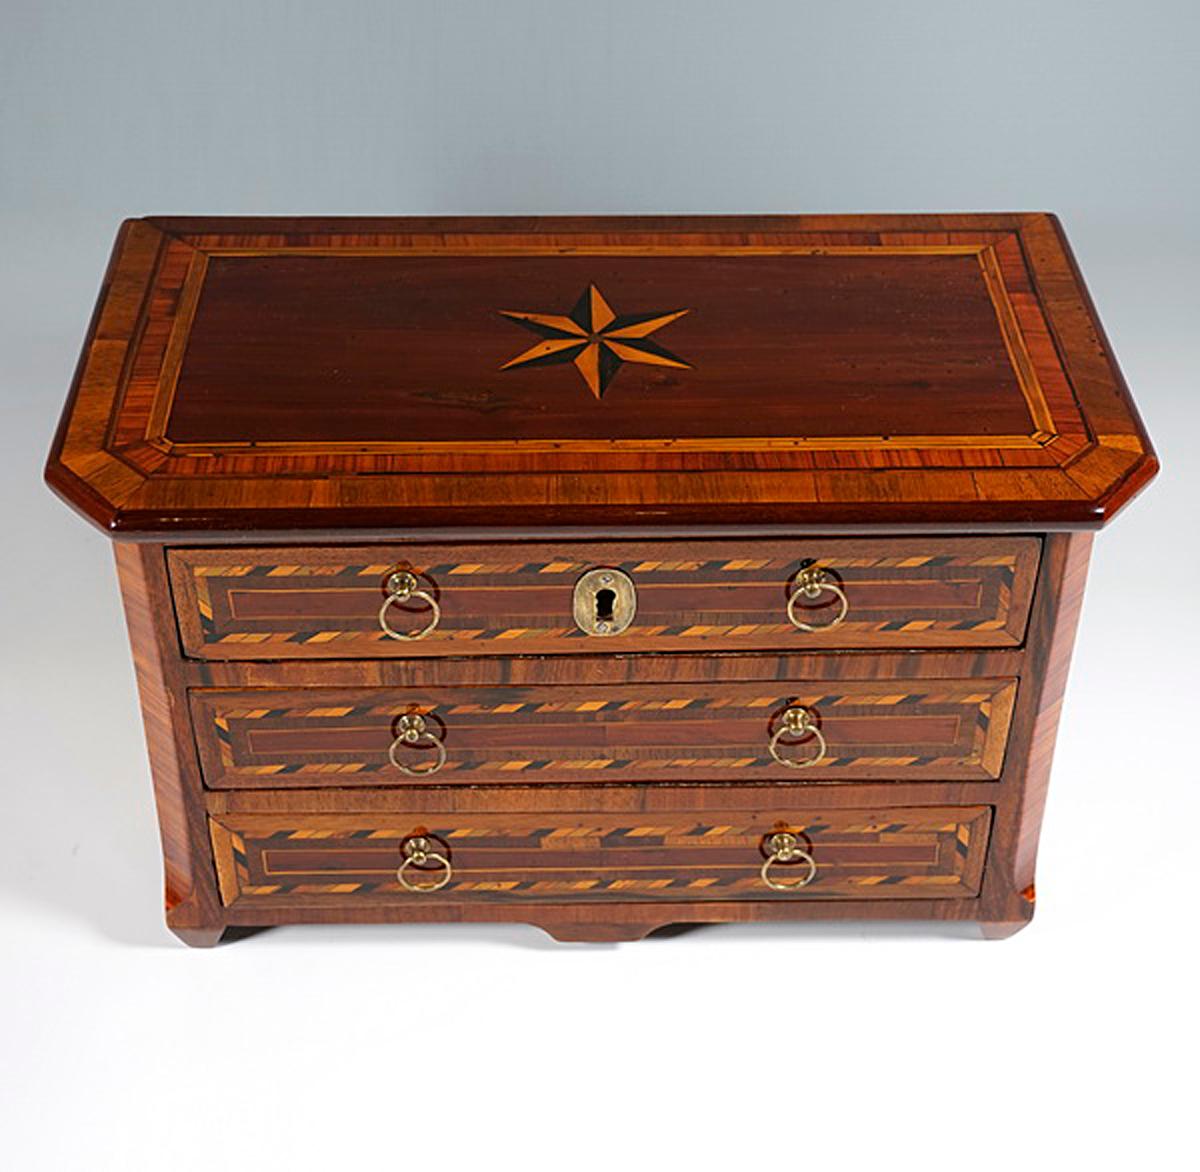 Miniature furniture made by hand in high quality: spruce body, veneered with walnut and numerous precious woods, marquetry in the form of fields and bands, star inlay on the top, smooth surfaces, bevelled side edges on the front, small butt feet